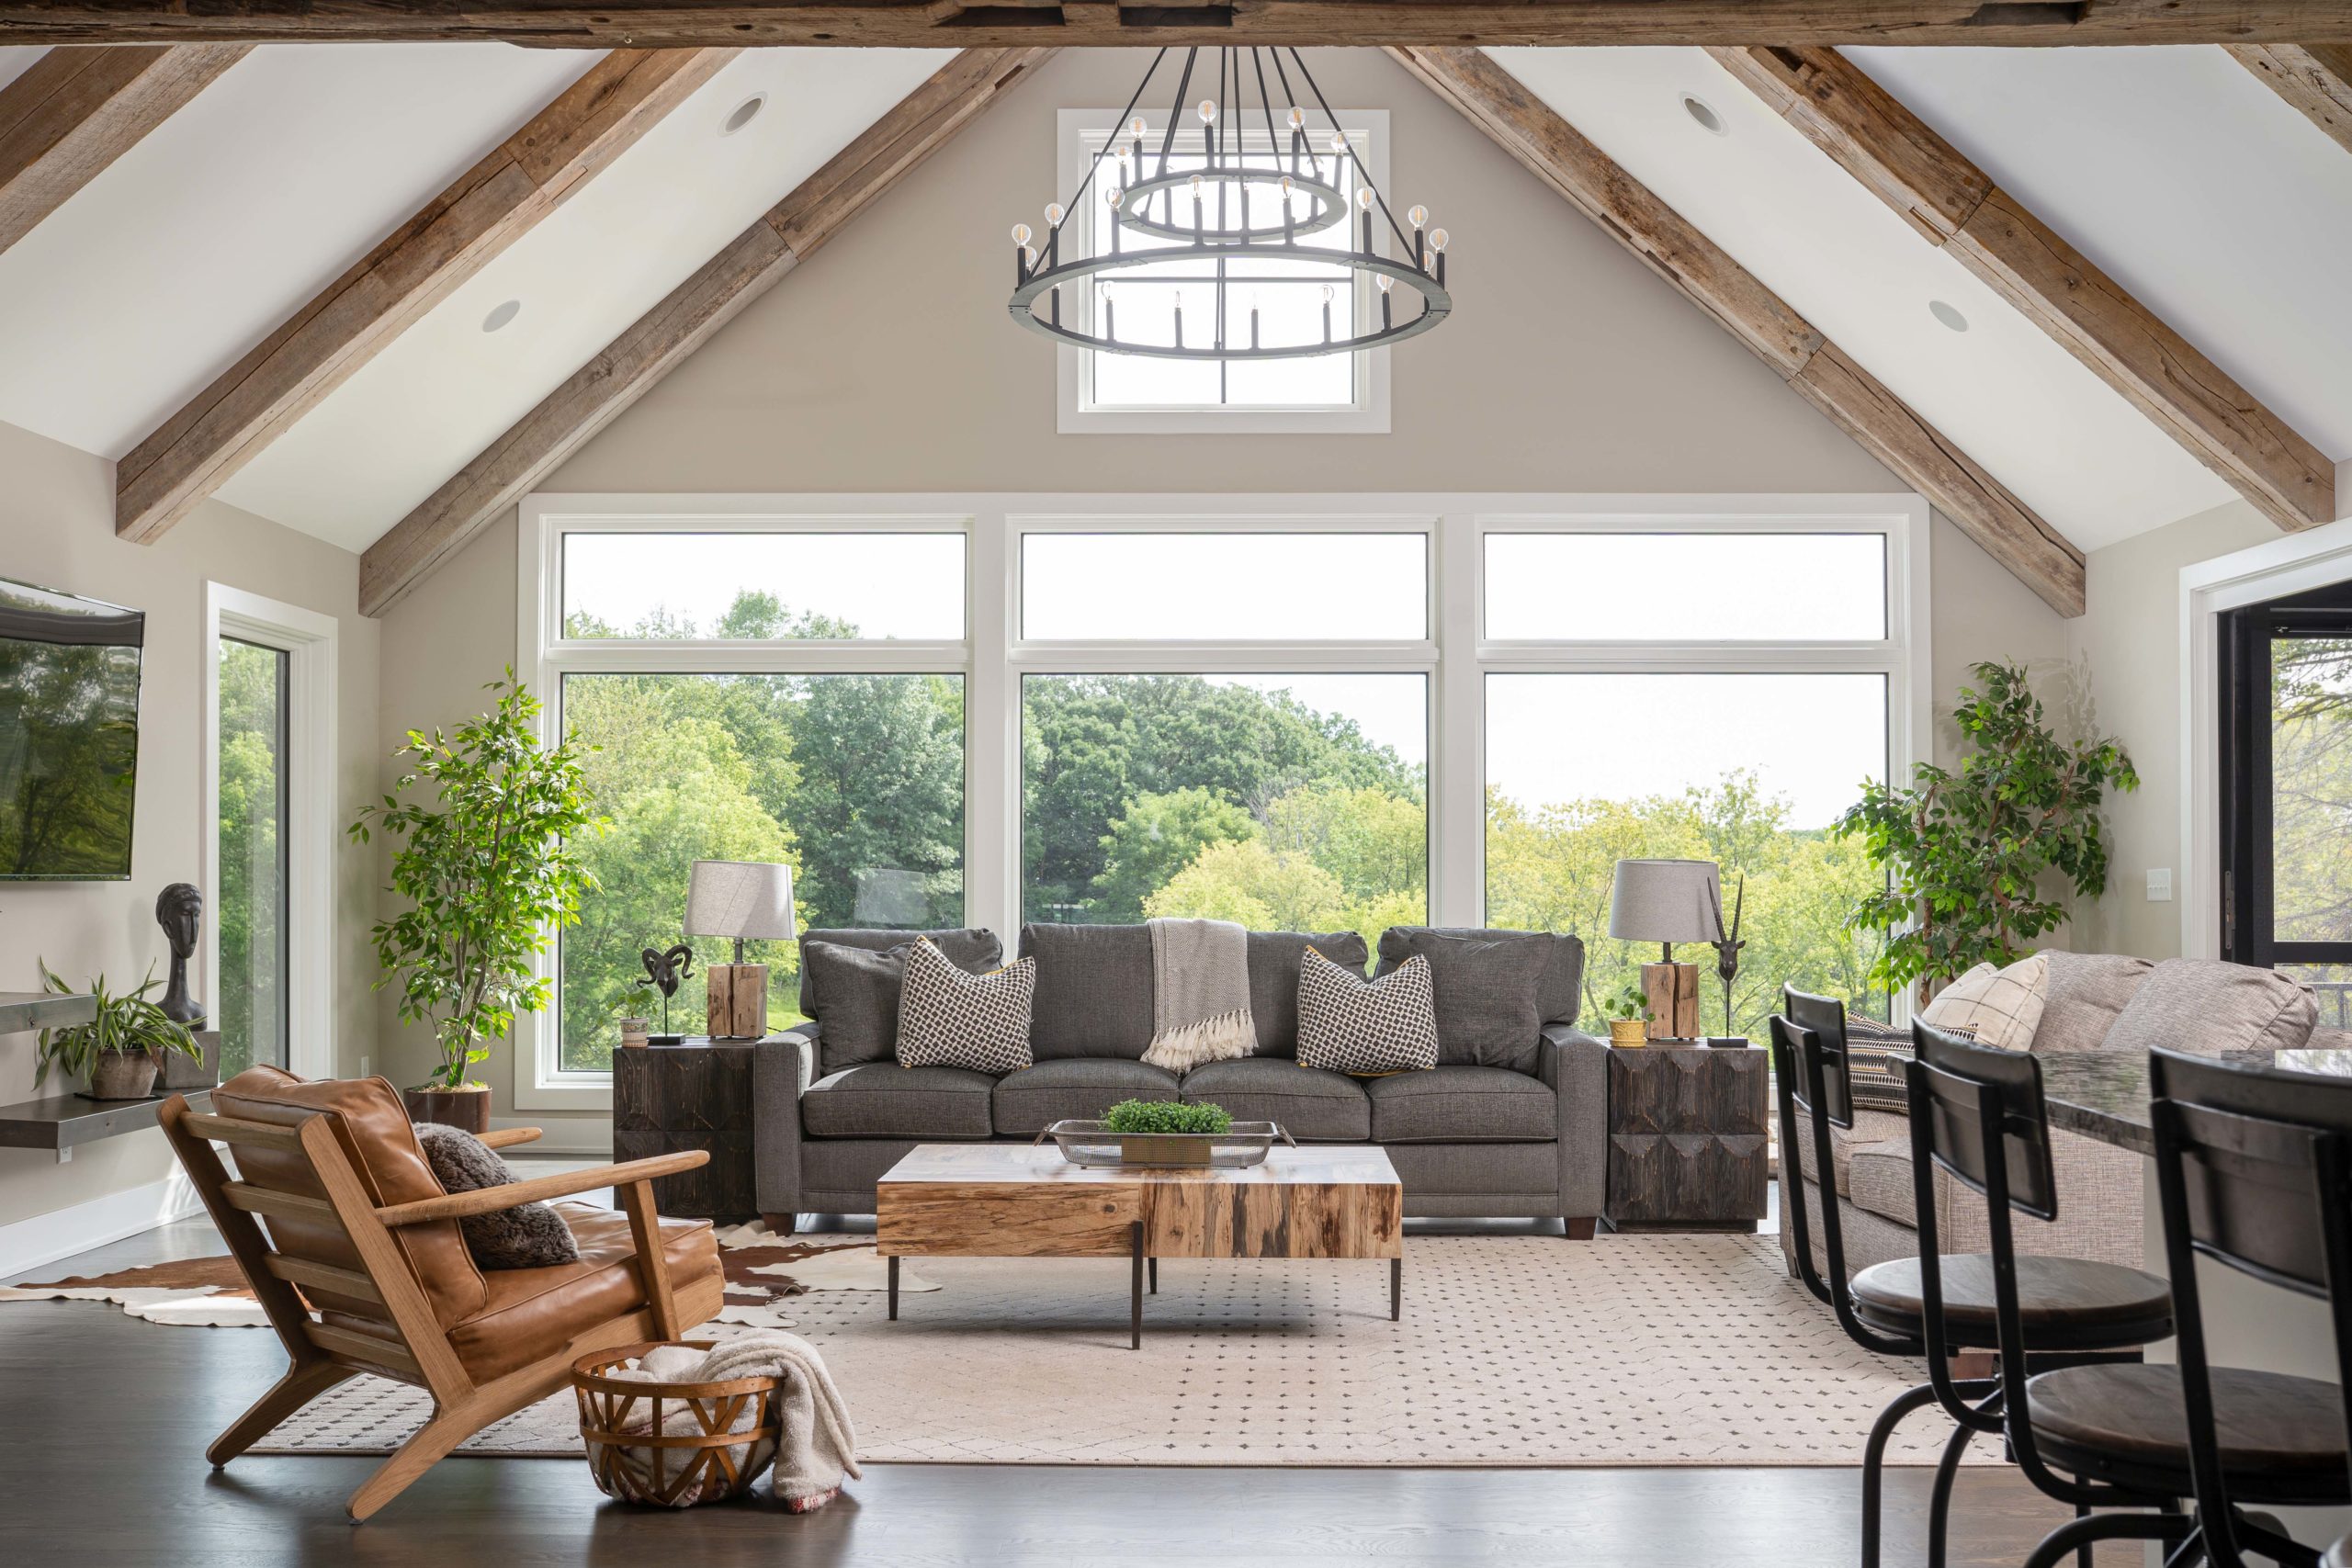 A living room with large windows and wood beams.